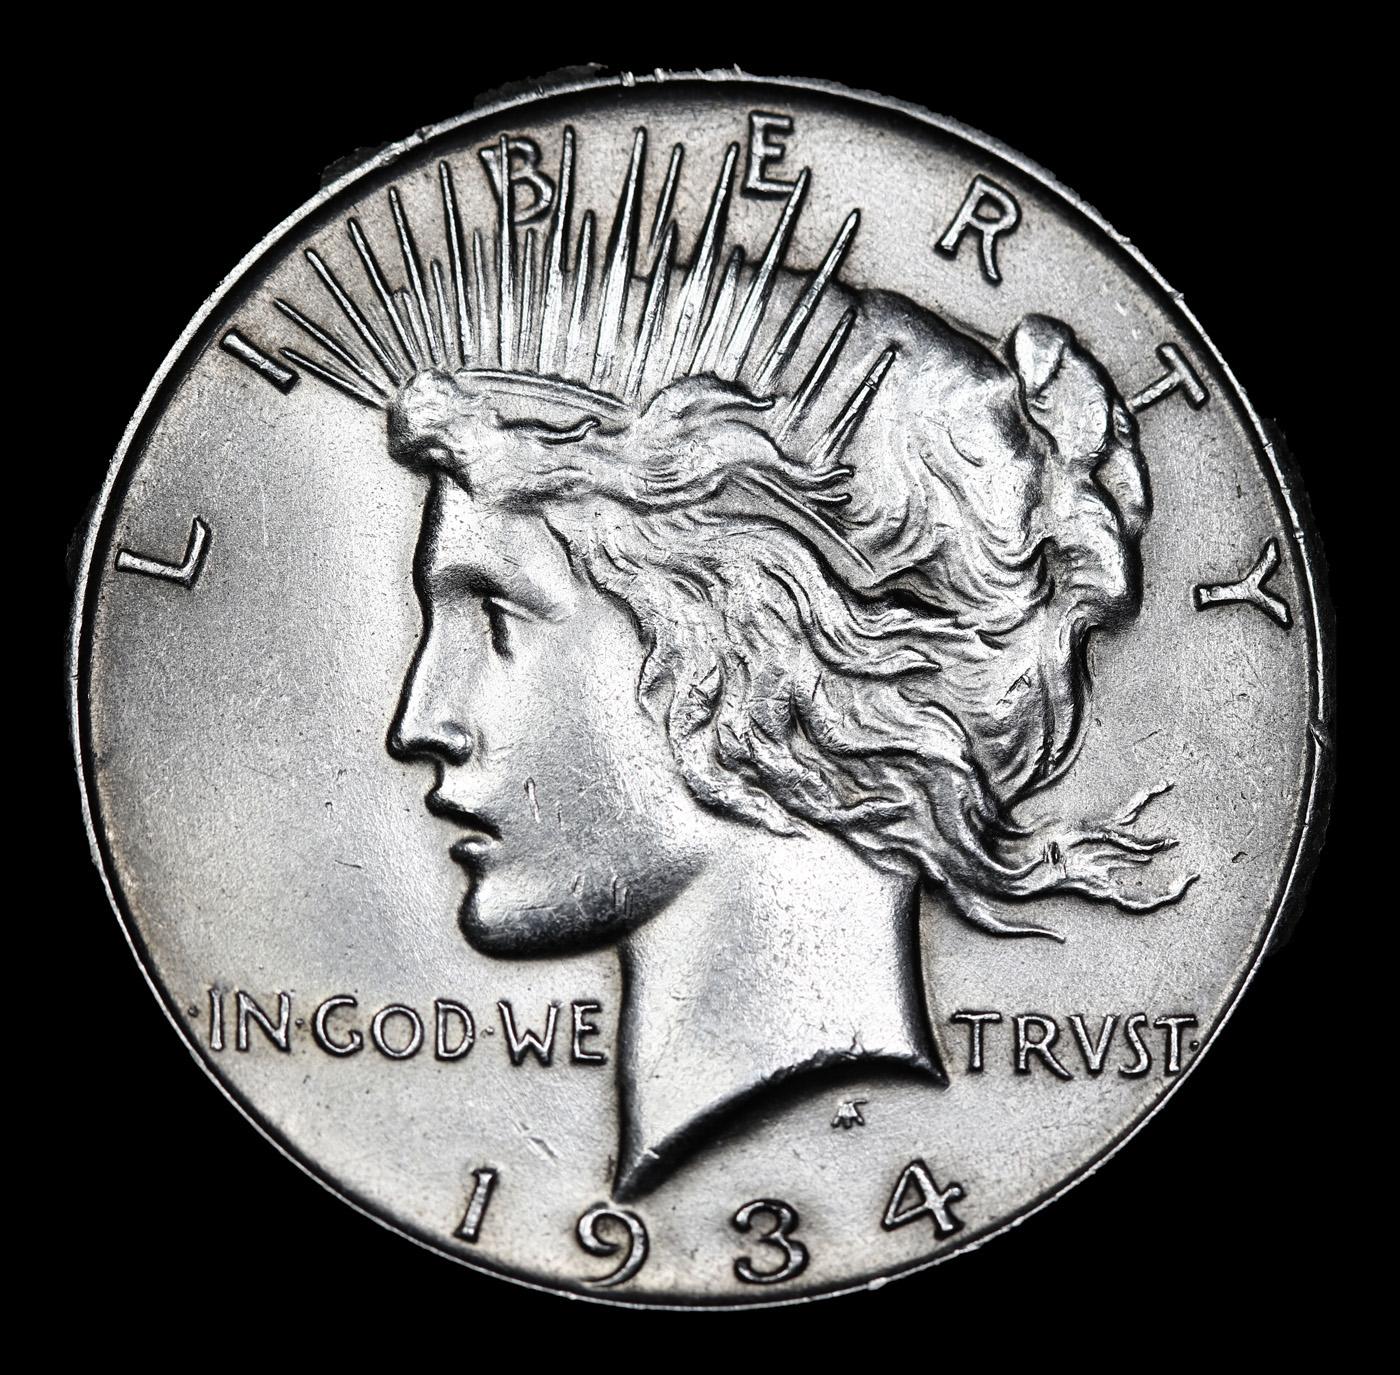 ***Auction Highlight*** 1934-s Peace Dollar 1 Graded ms63+ By SEGS (fc)